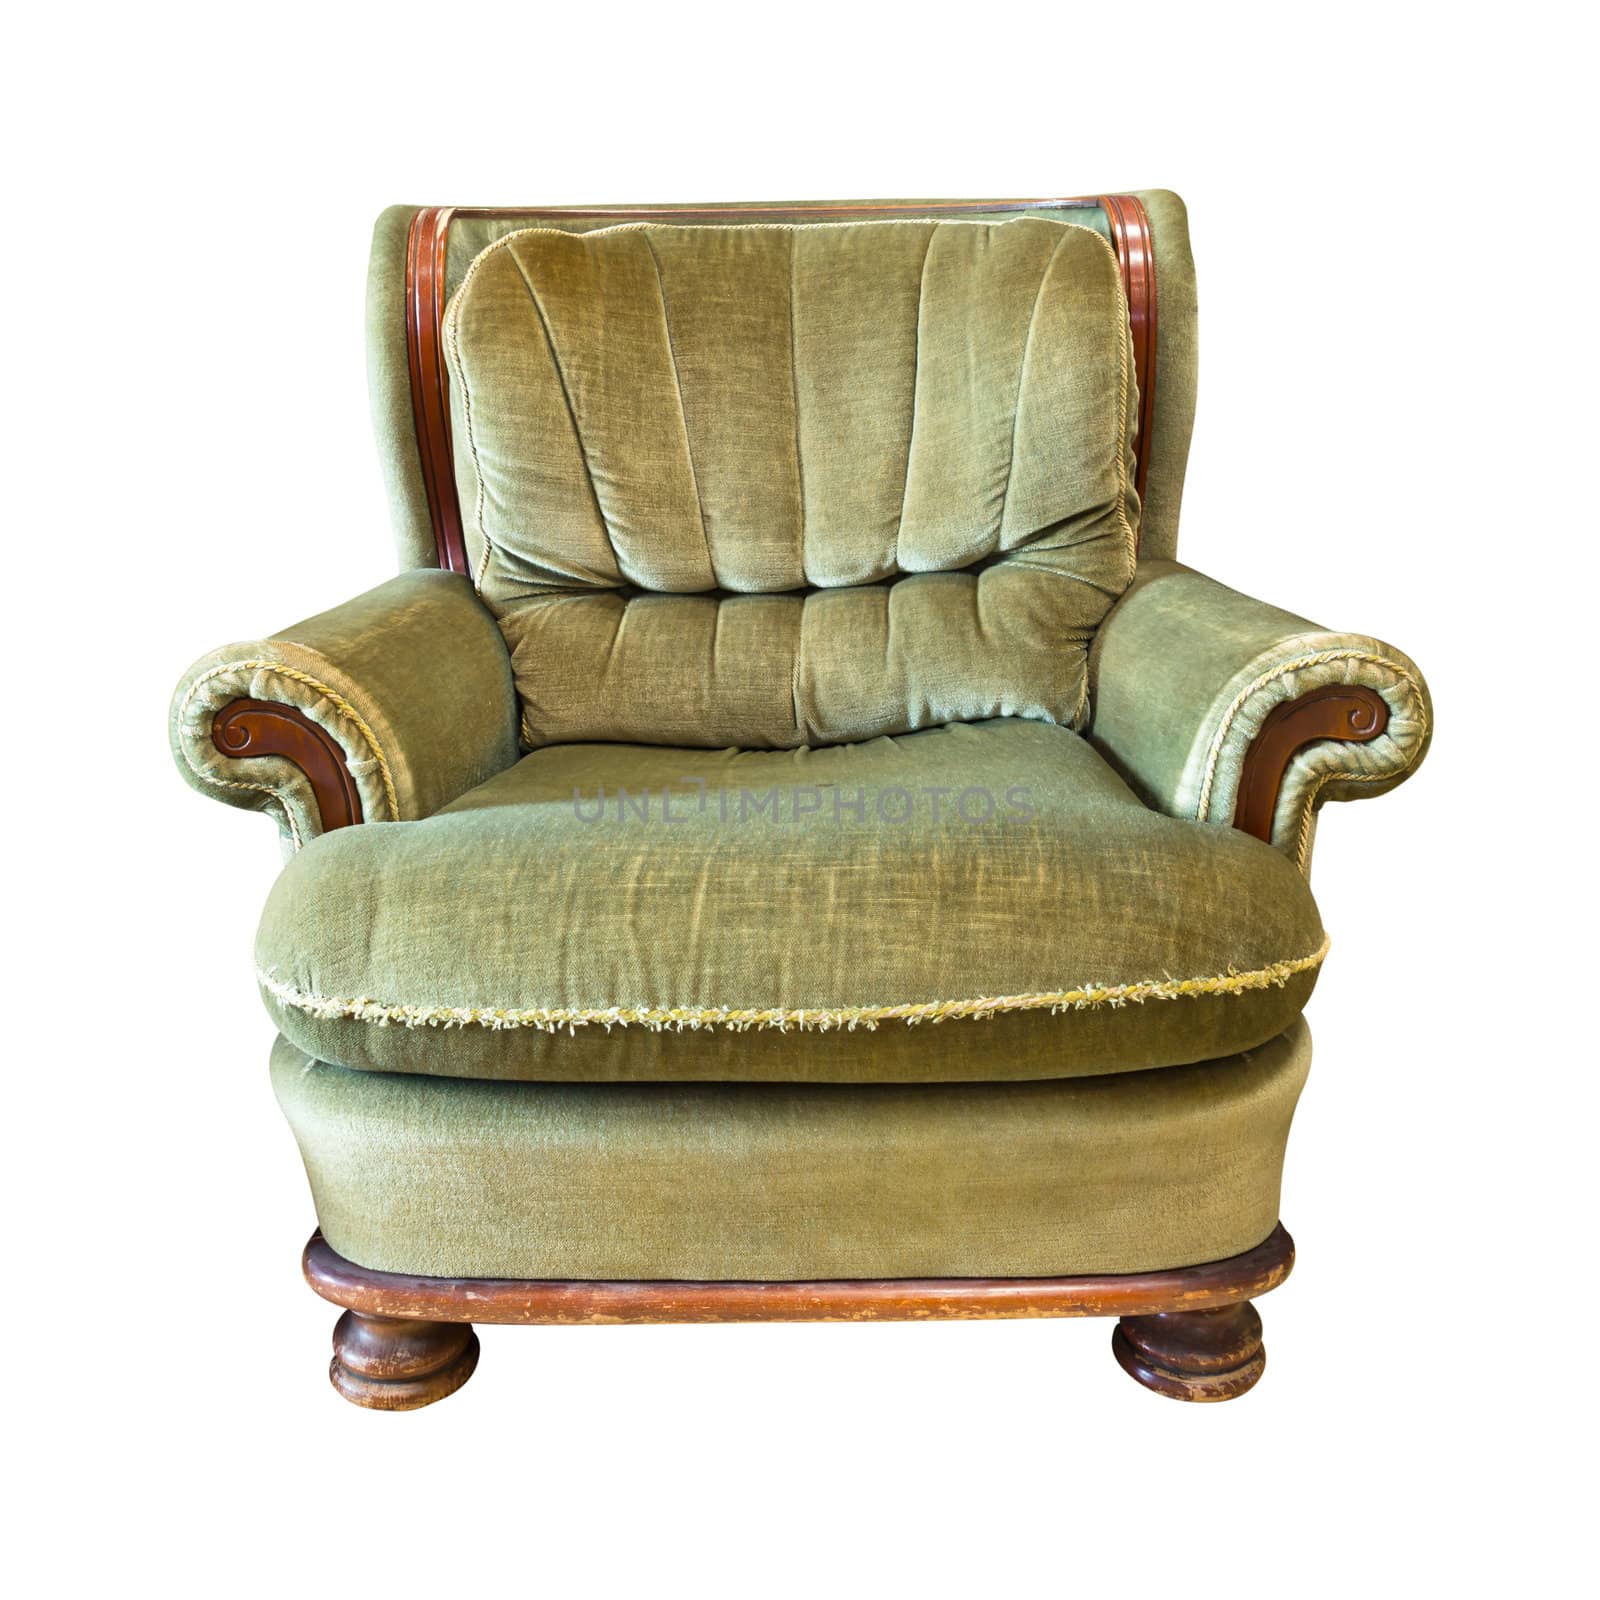 vintage armchair isolated with clipping path by tungphoto